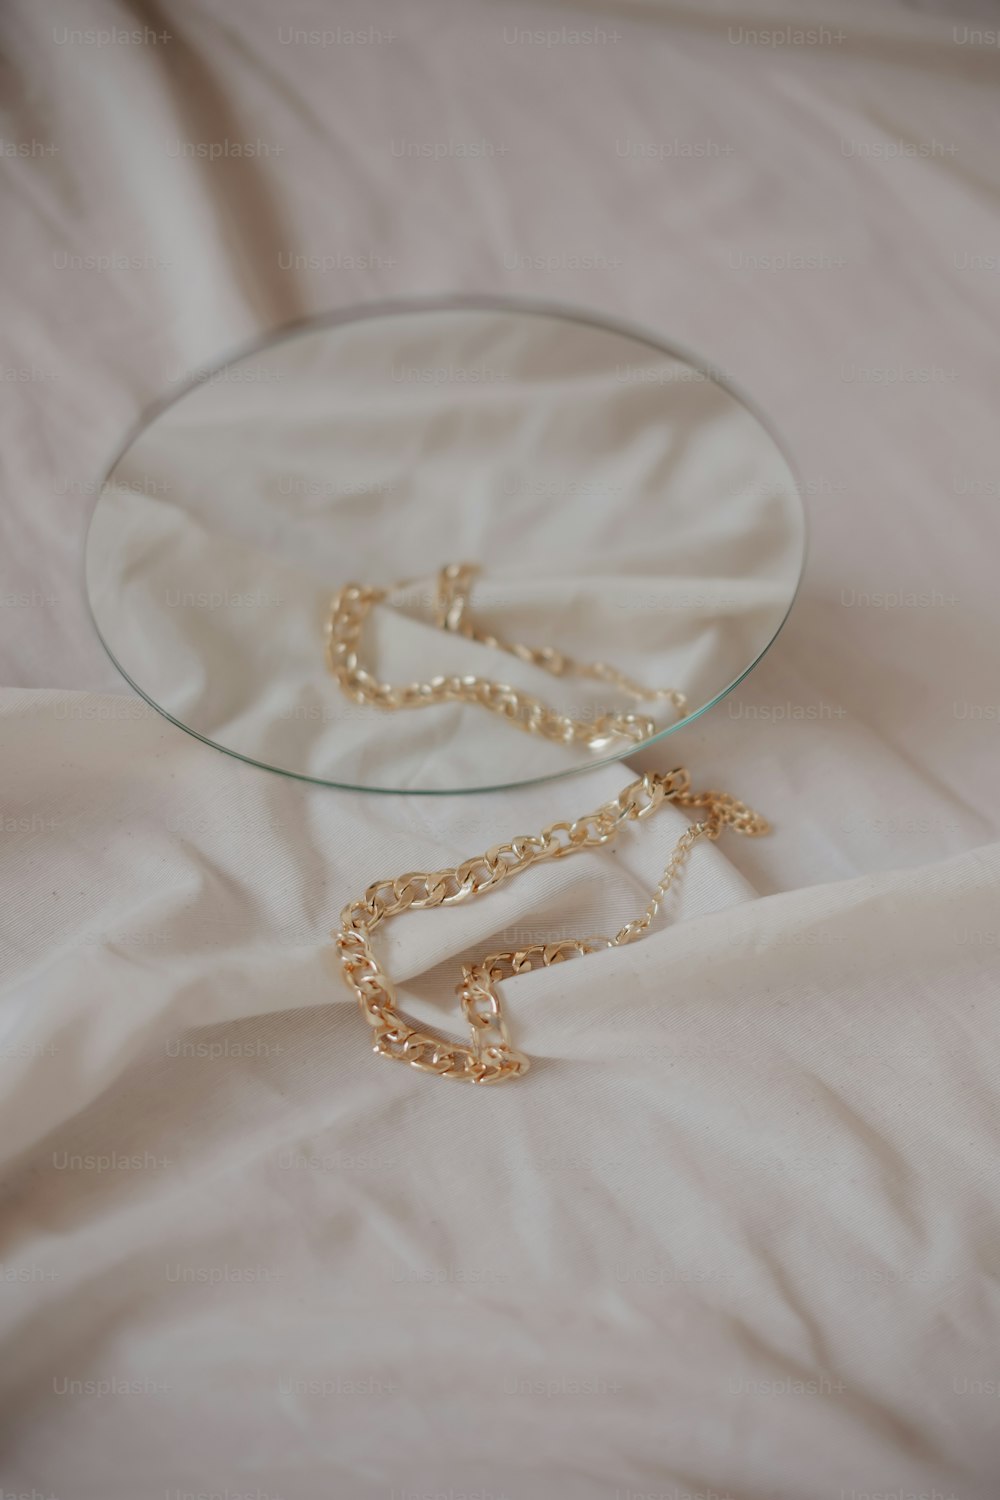 a glass plate with a gold chain on it